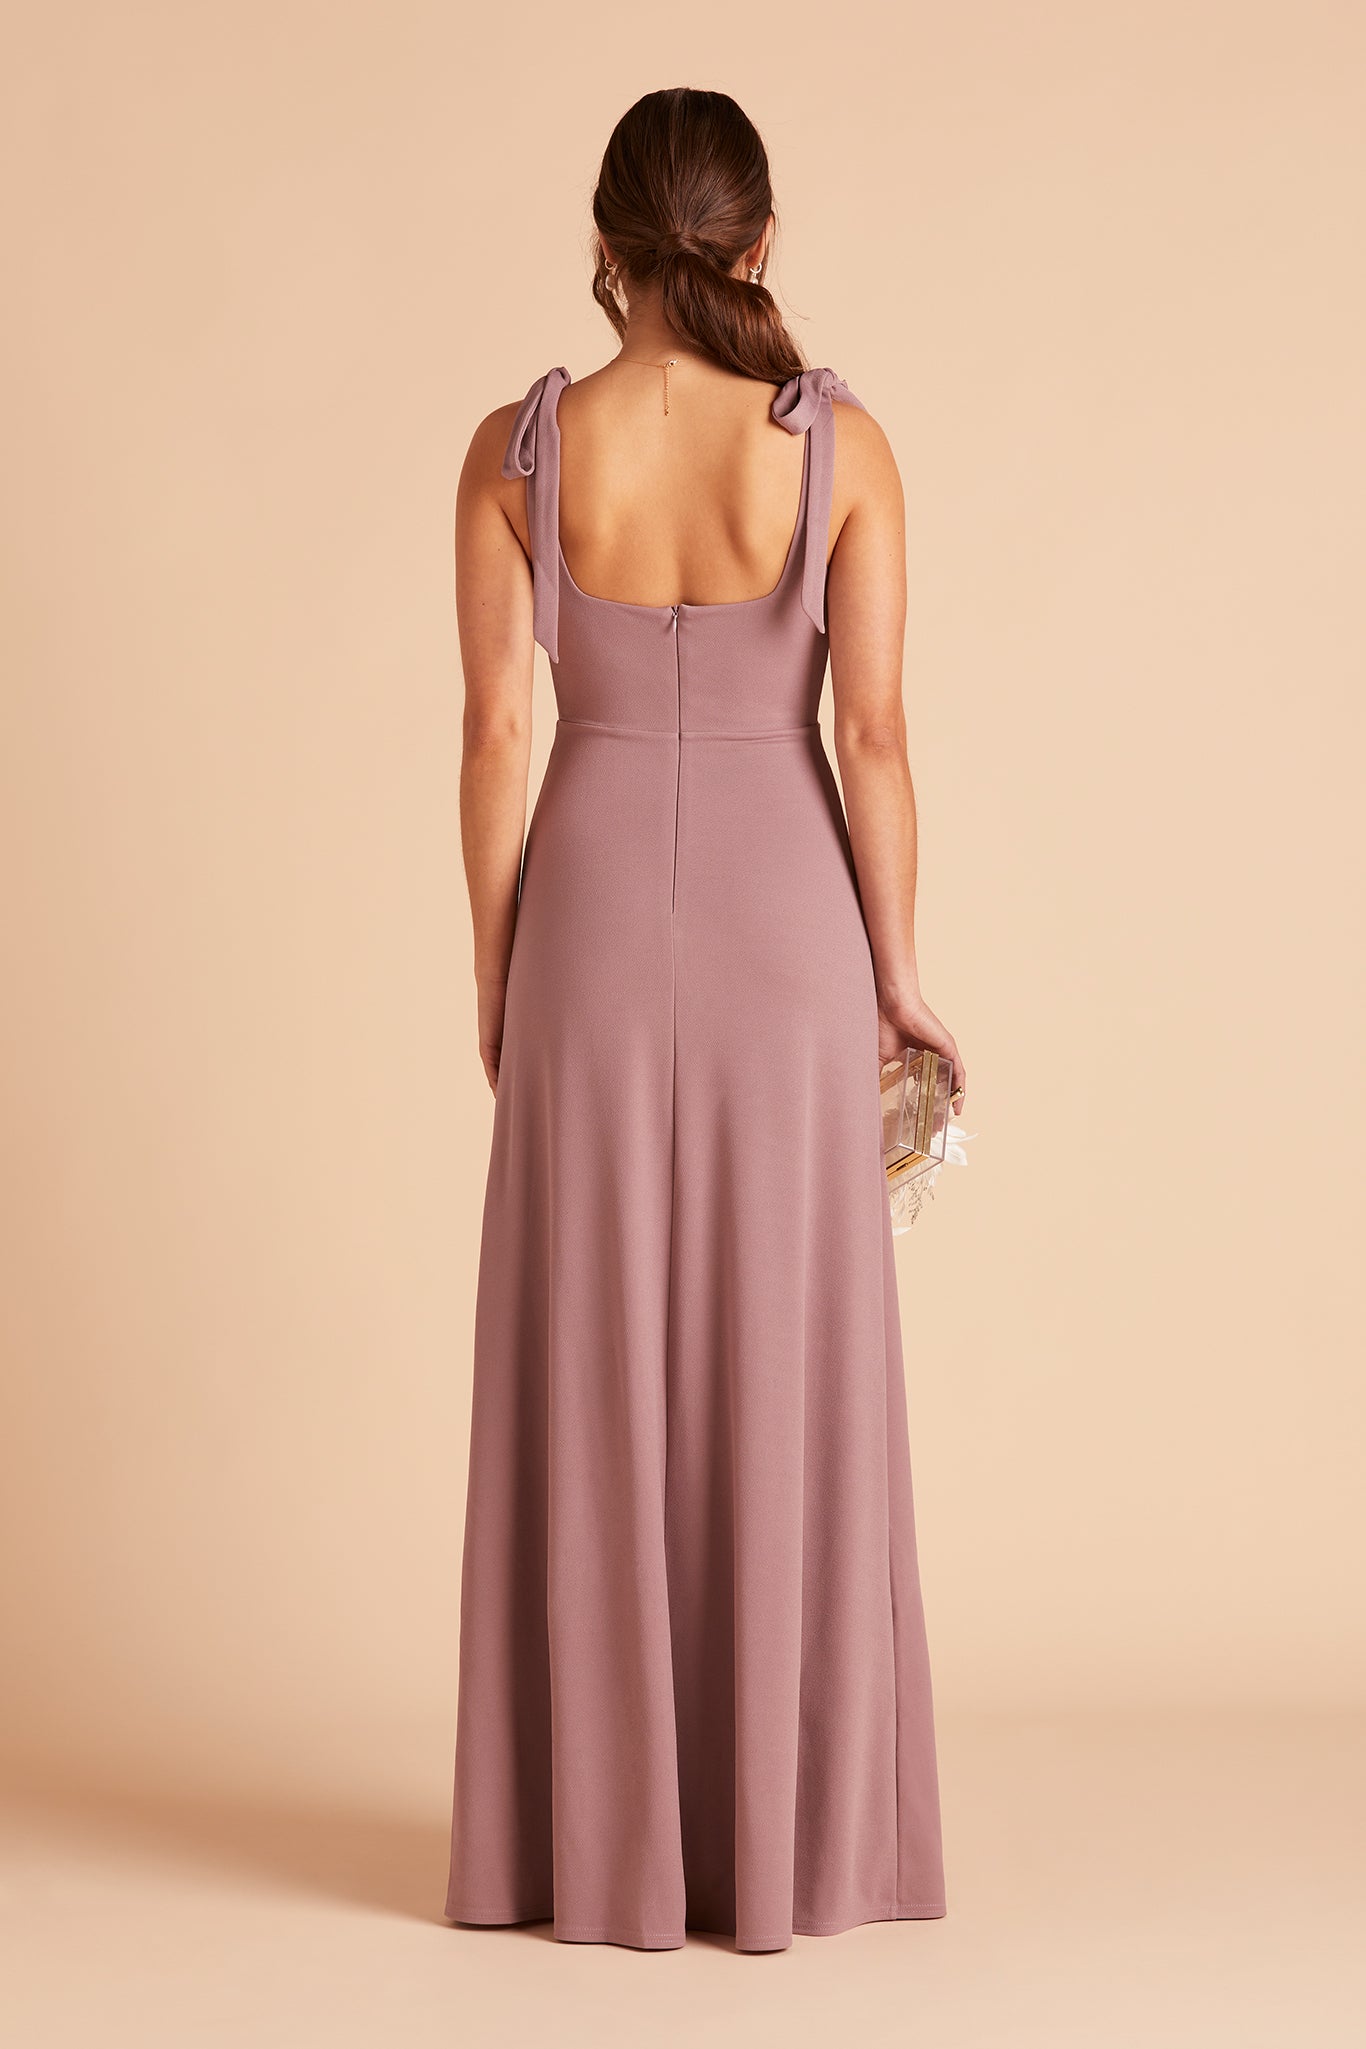 Alex convertible bridesmaid dress with slit in dark mauve crepe by Birdy Grey, back  view